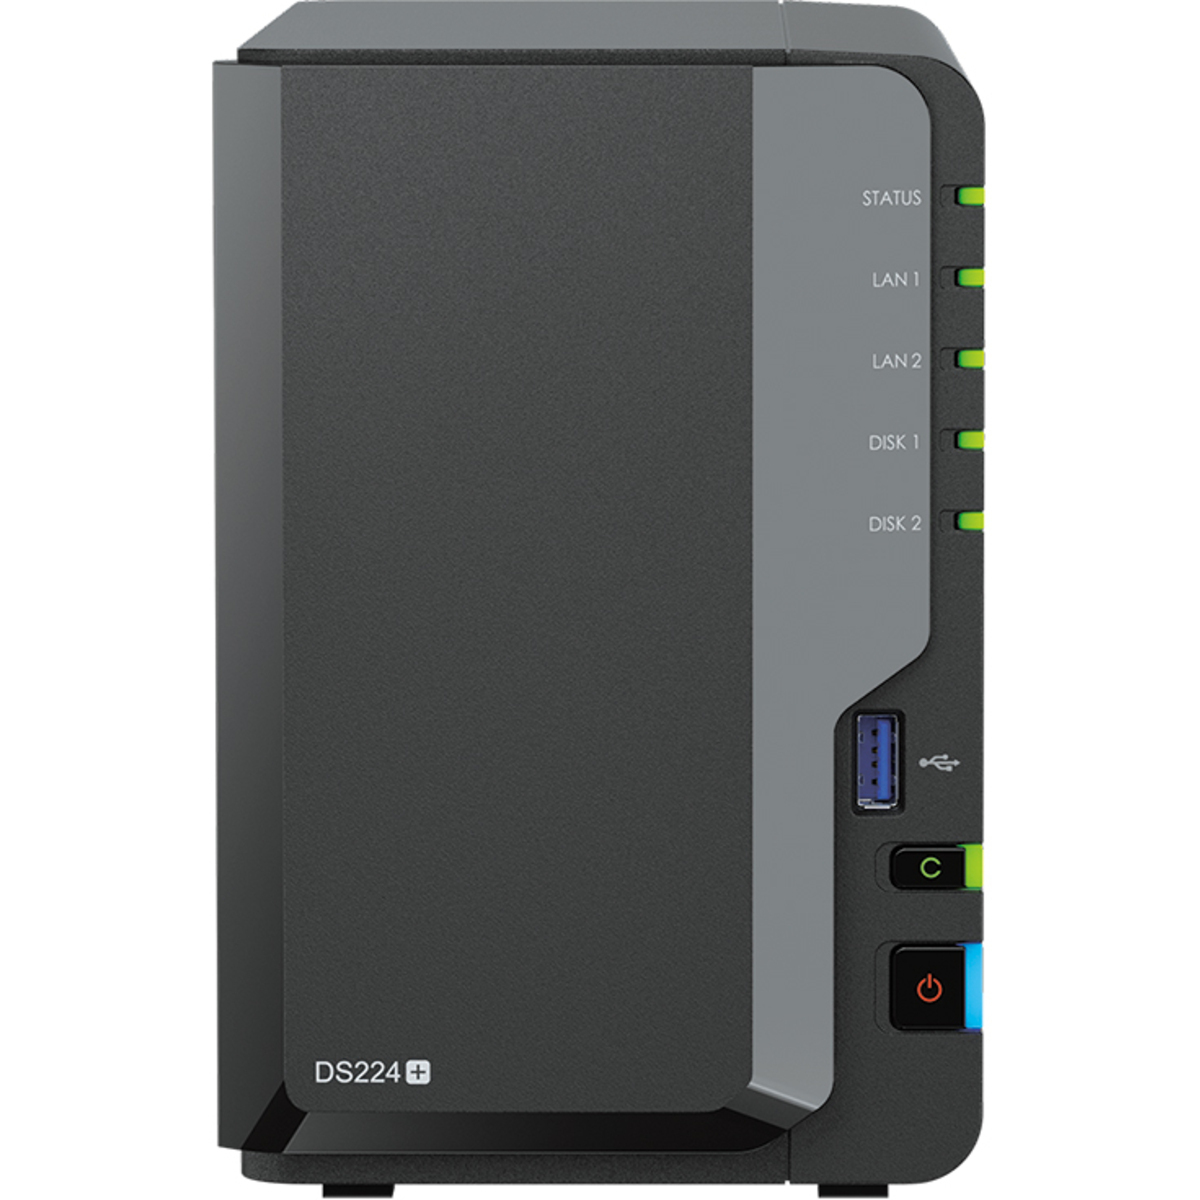 Synology DiskStation DS224+ 48tb 2-Bay Desktop Personal / Basic Home / Small Office NAS - Network Attached Storage Device 2x24tb Western Digital Red Pro WD240KFGX 3.5 7200rpm SATA 6Gb/s HDD NAS Class Drives Installed - Burn-In Tested - ON SALE - FREE RAM UPGRADE DiskStation DS224+